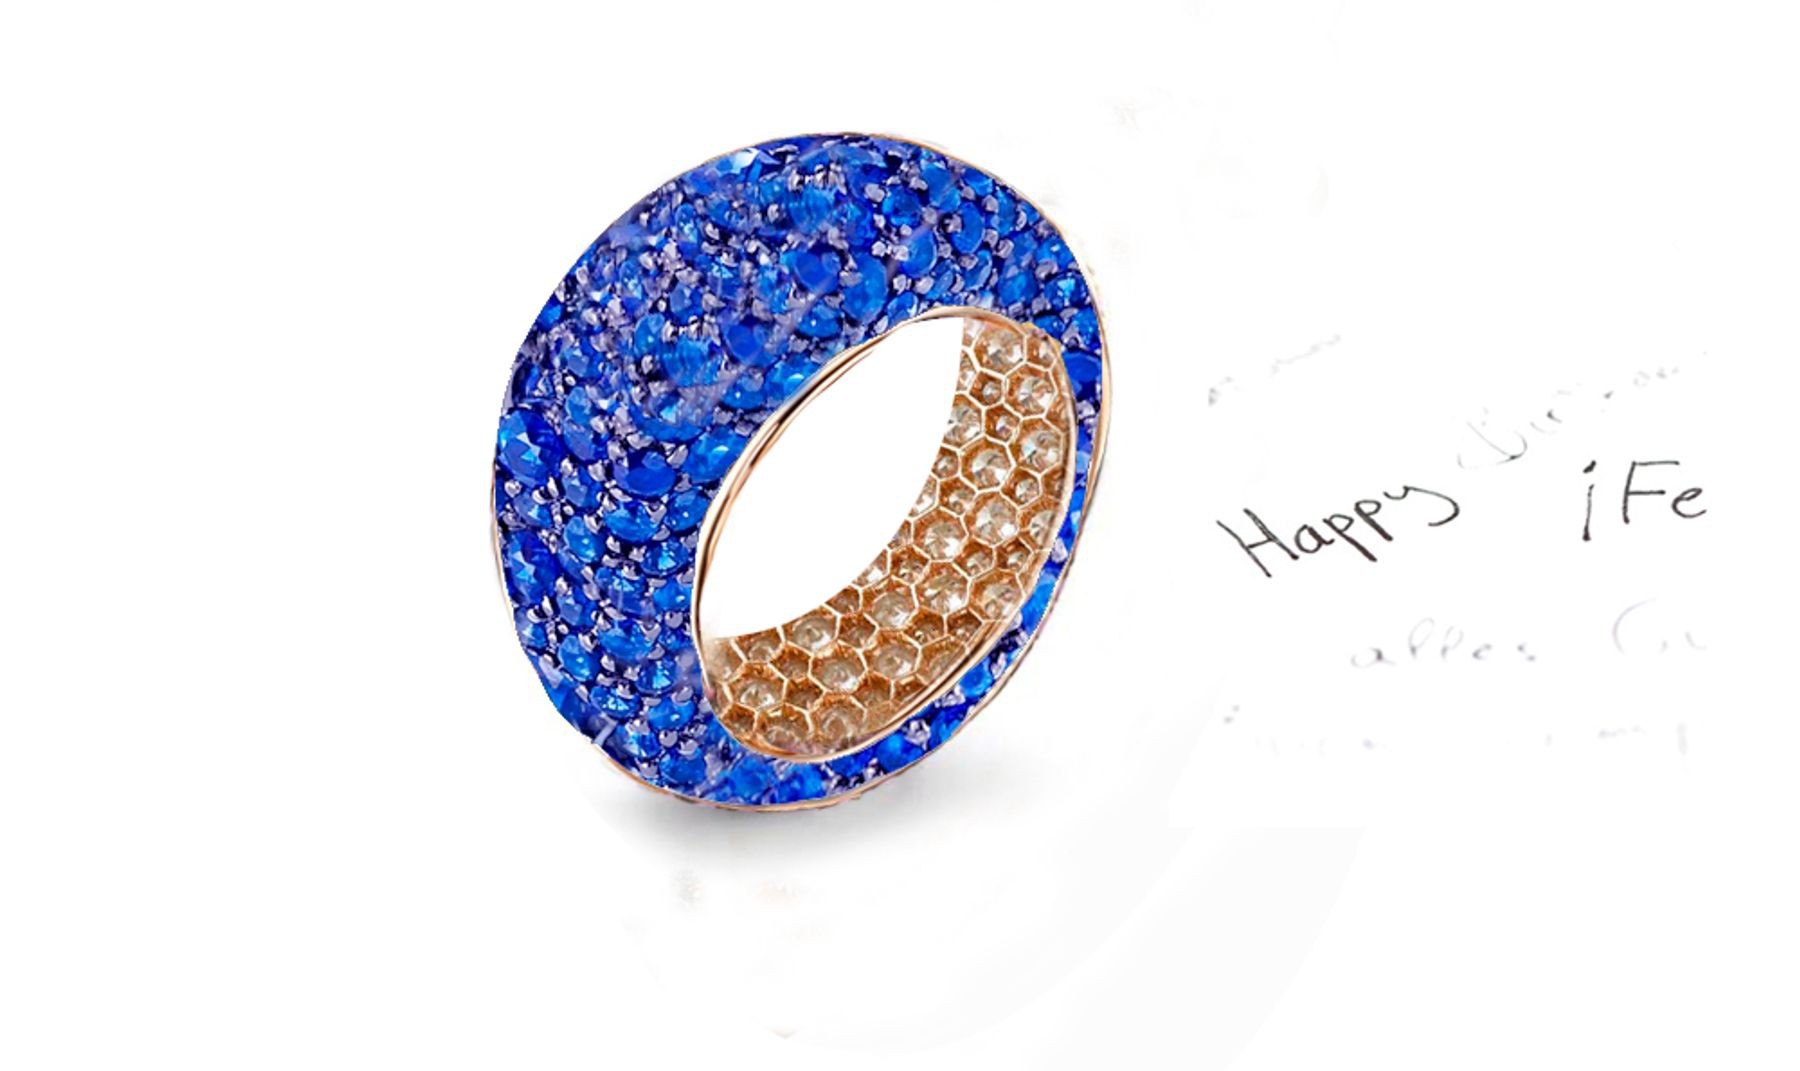 Celebrate Your Love Relationship With Perfect Made to Order Diamonds & Colored Gemstones Eternity Rings & Bands